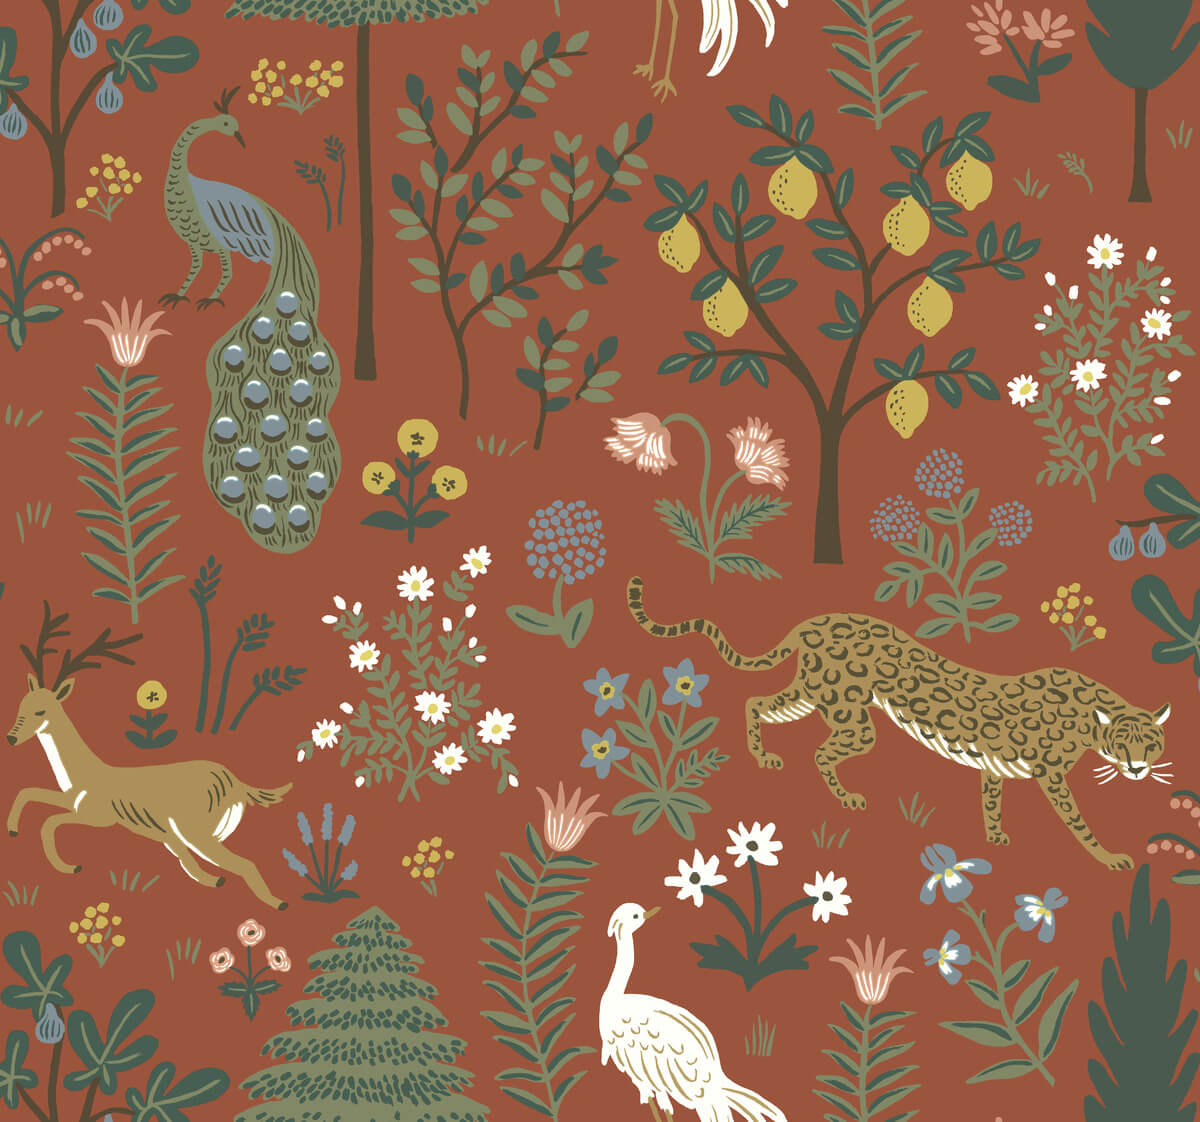 Rifle Paper Co. Second Edition Menagerie Wallpaper - Rust Brown